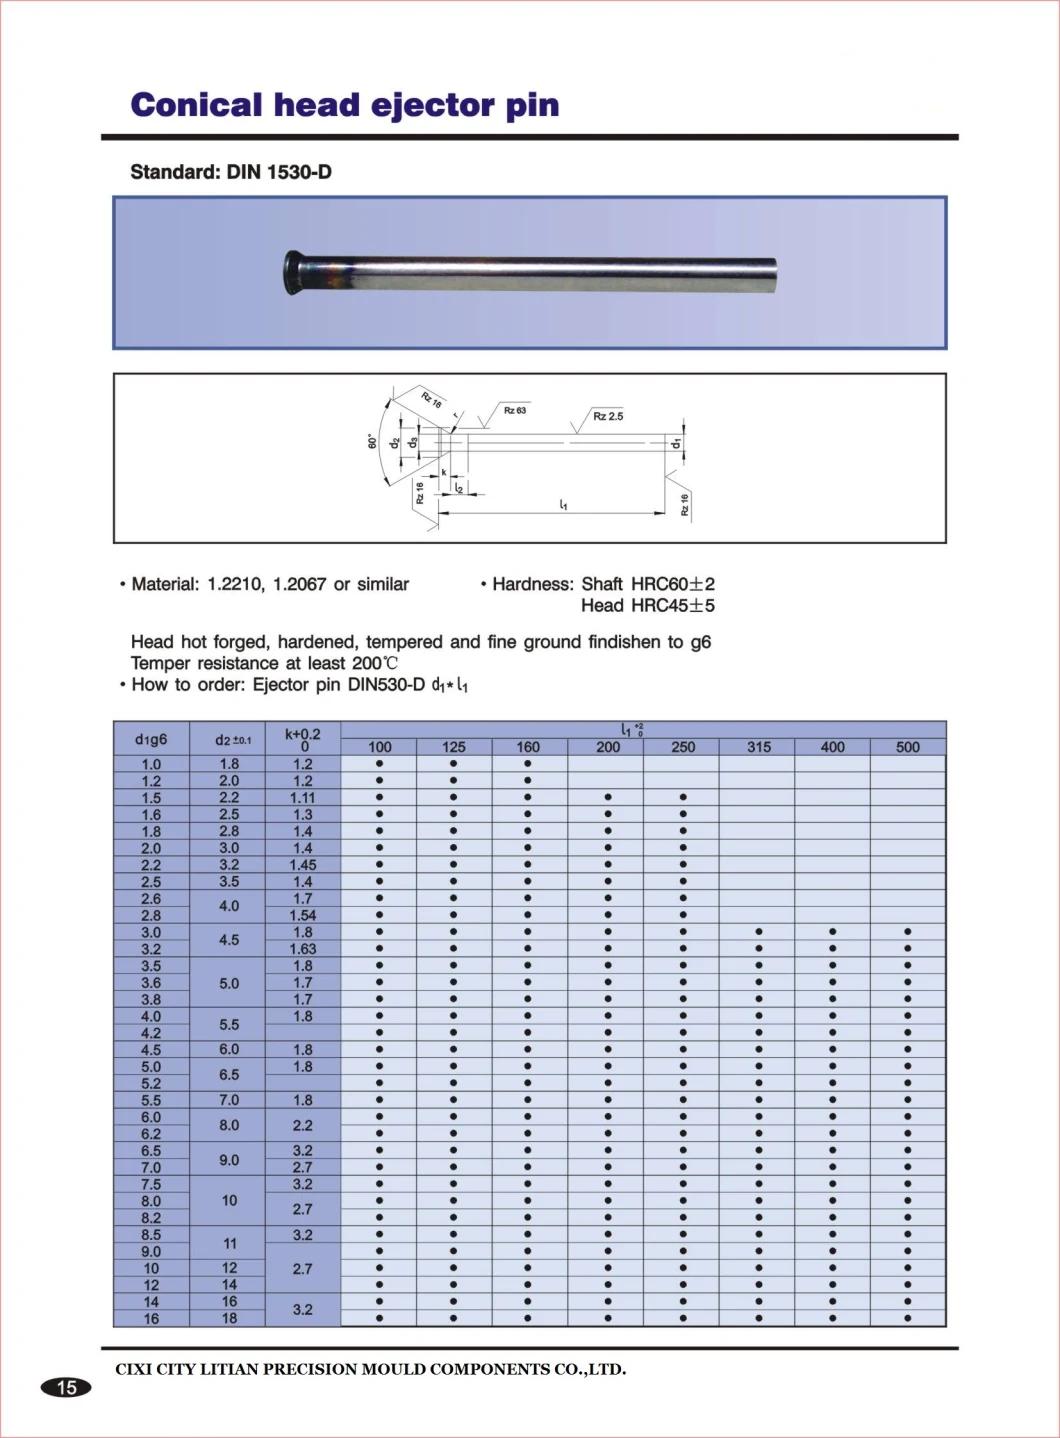 DIN 1530-D Conical Head Ejector Pin